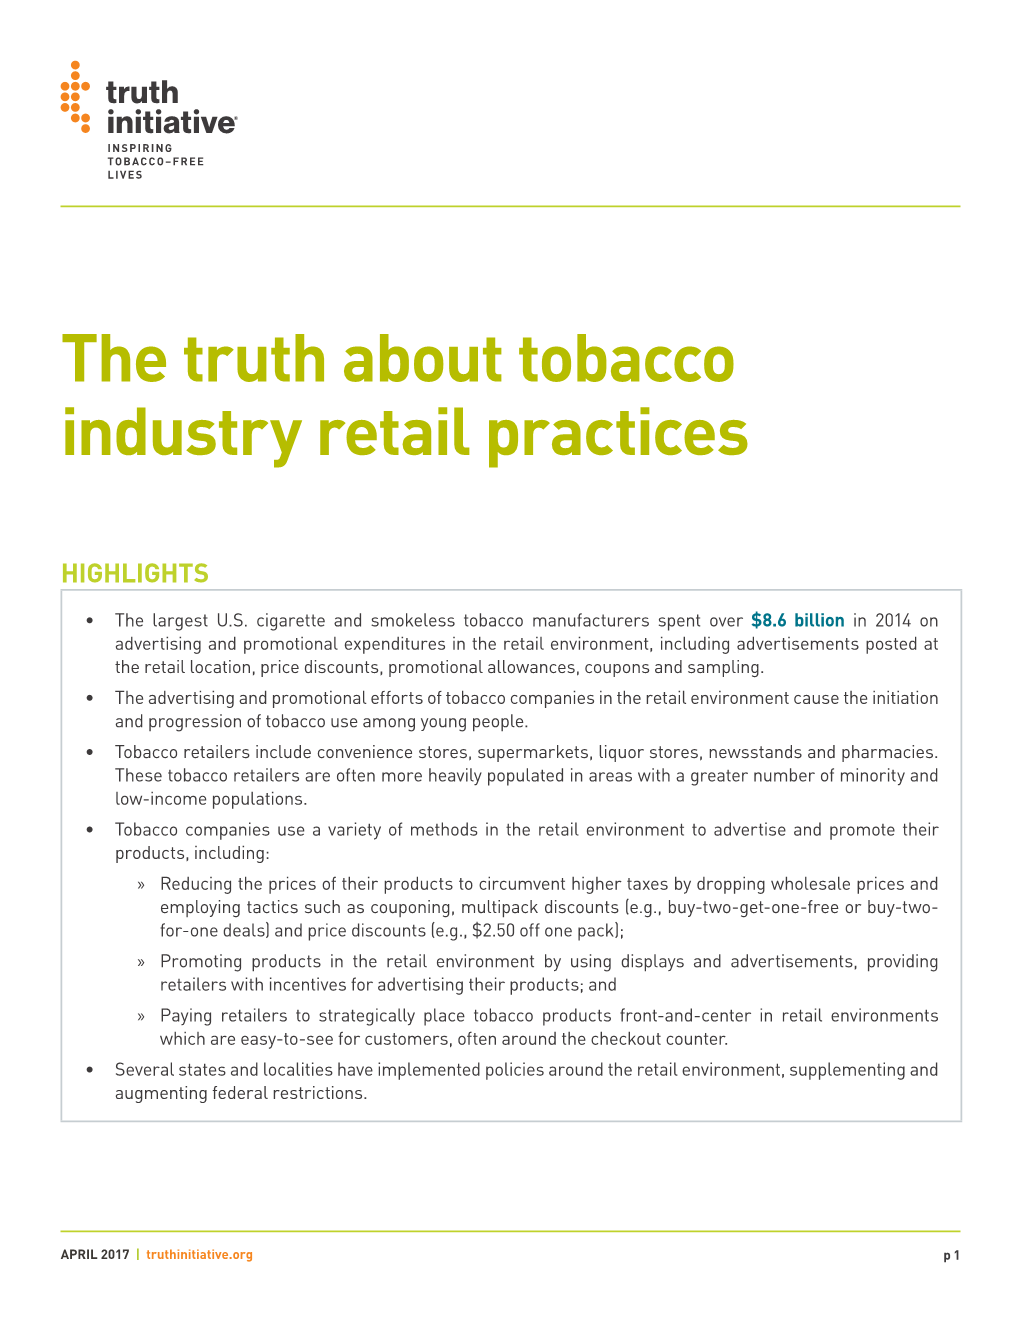 The Truth About Tobacco Industry Retail Practices